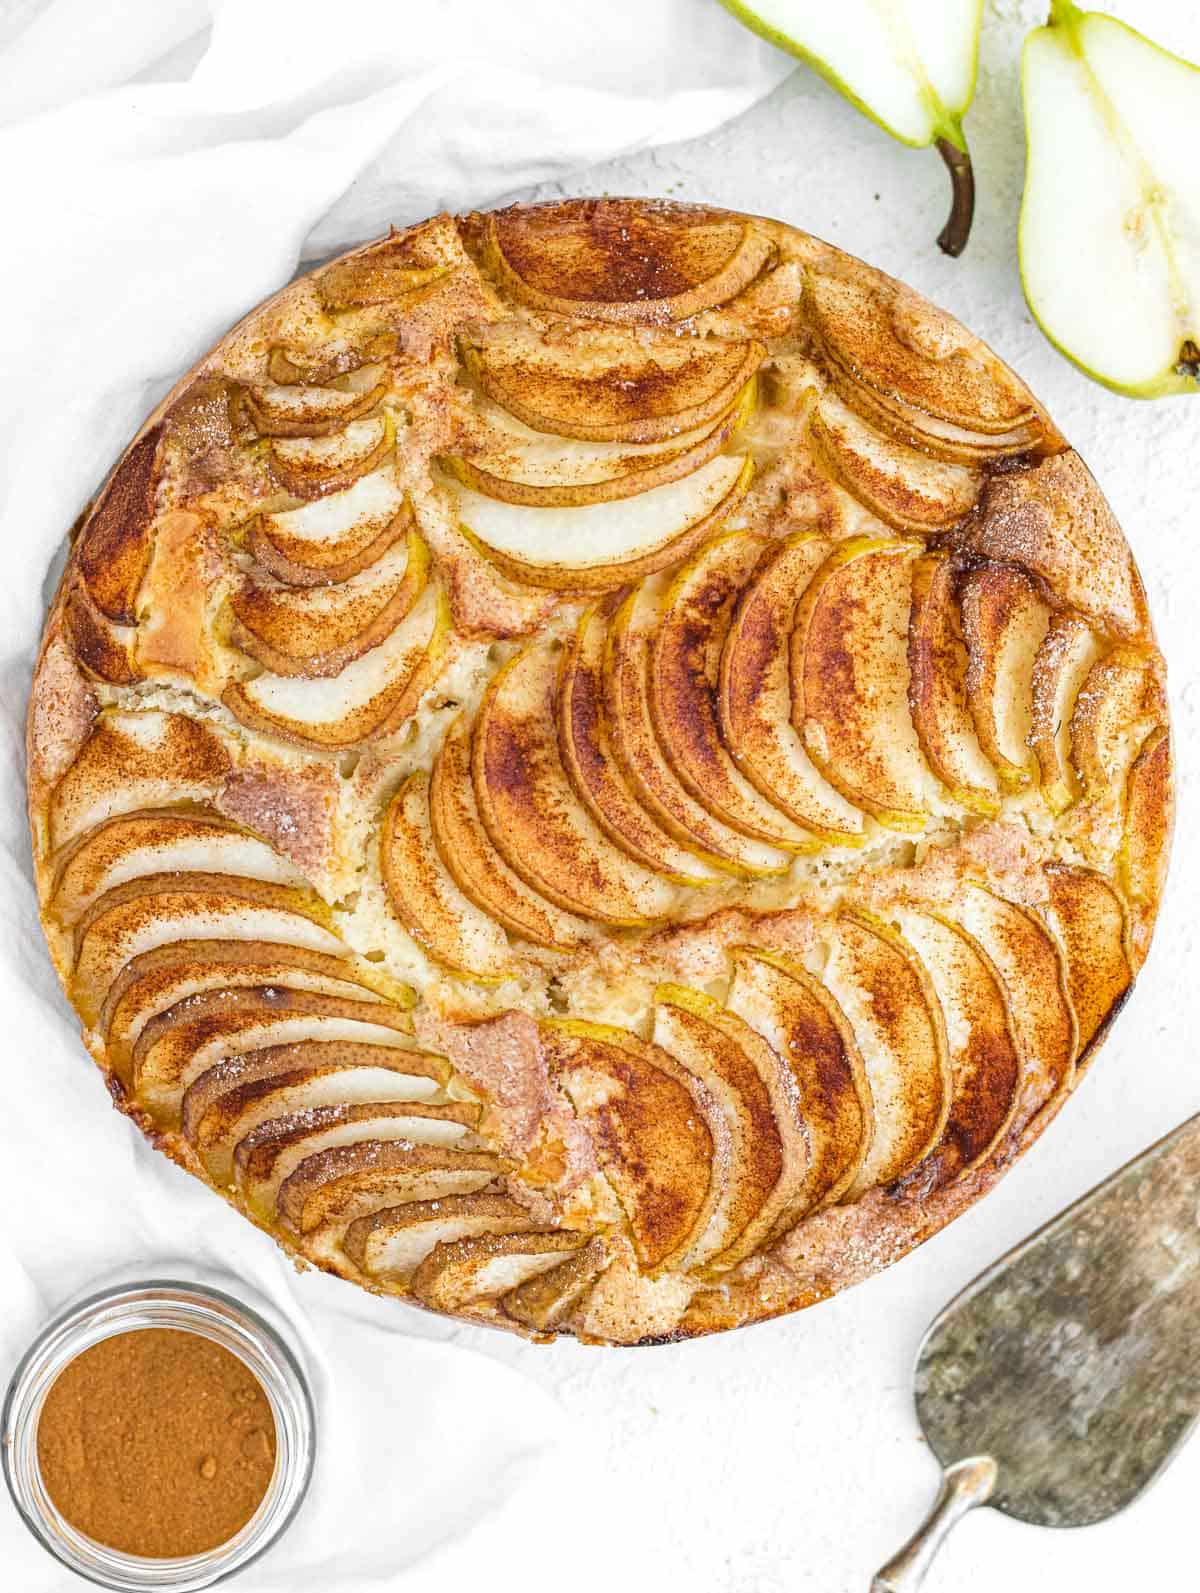 pear cake with cinnamon and fresh pears